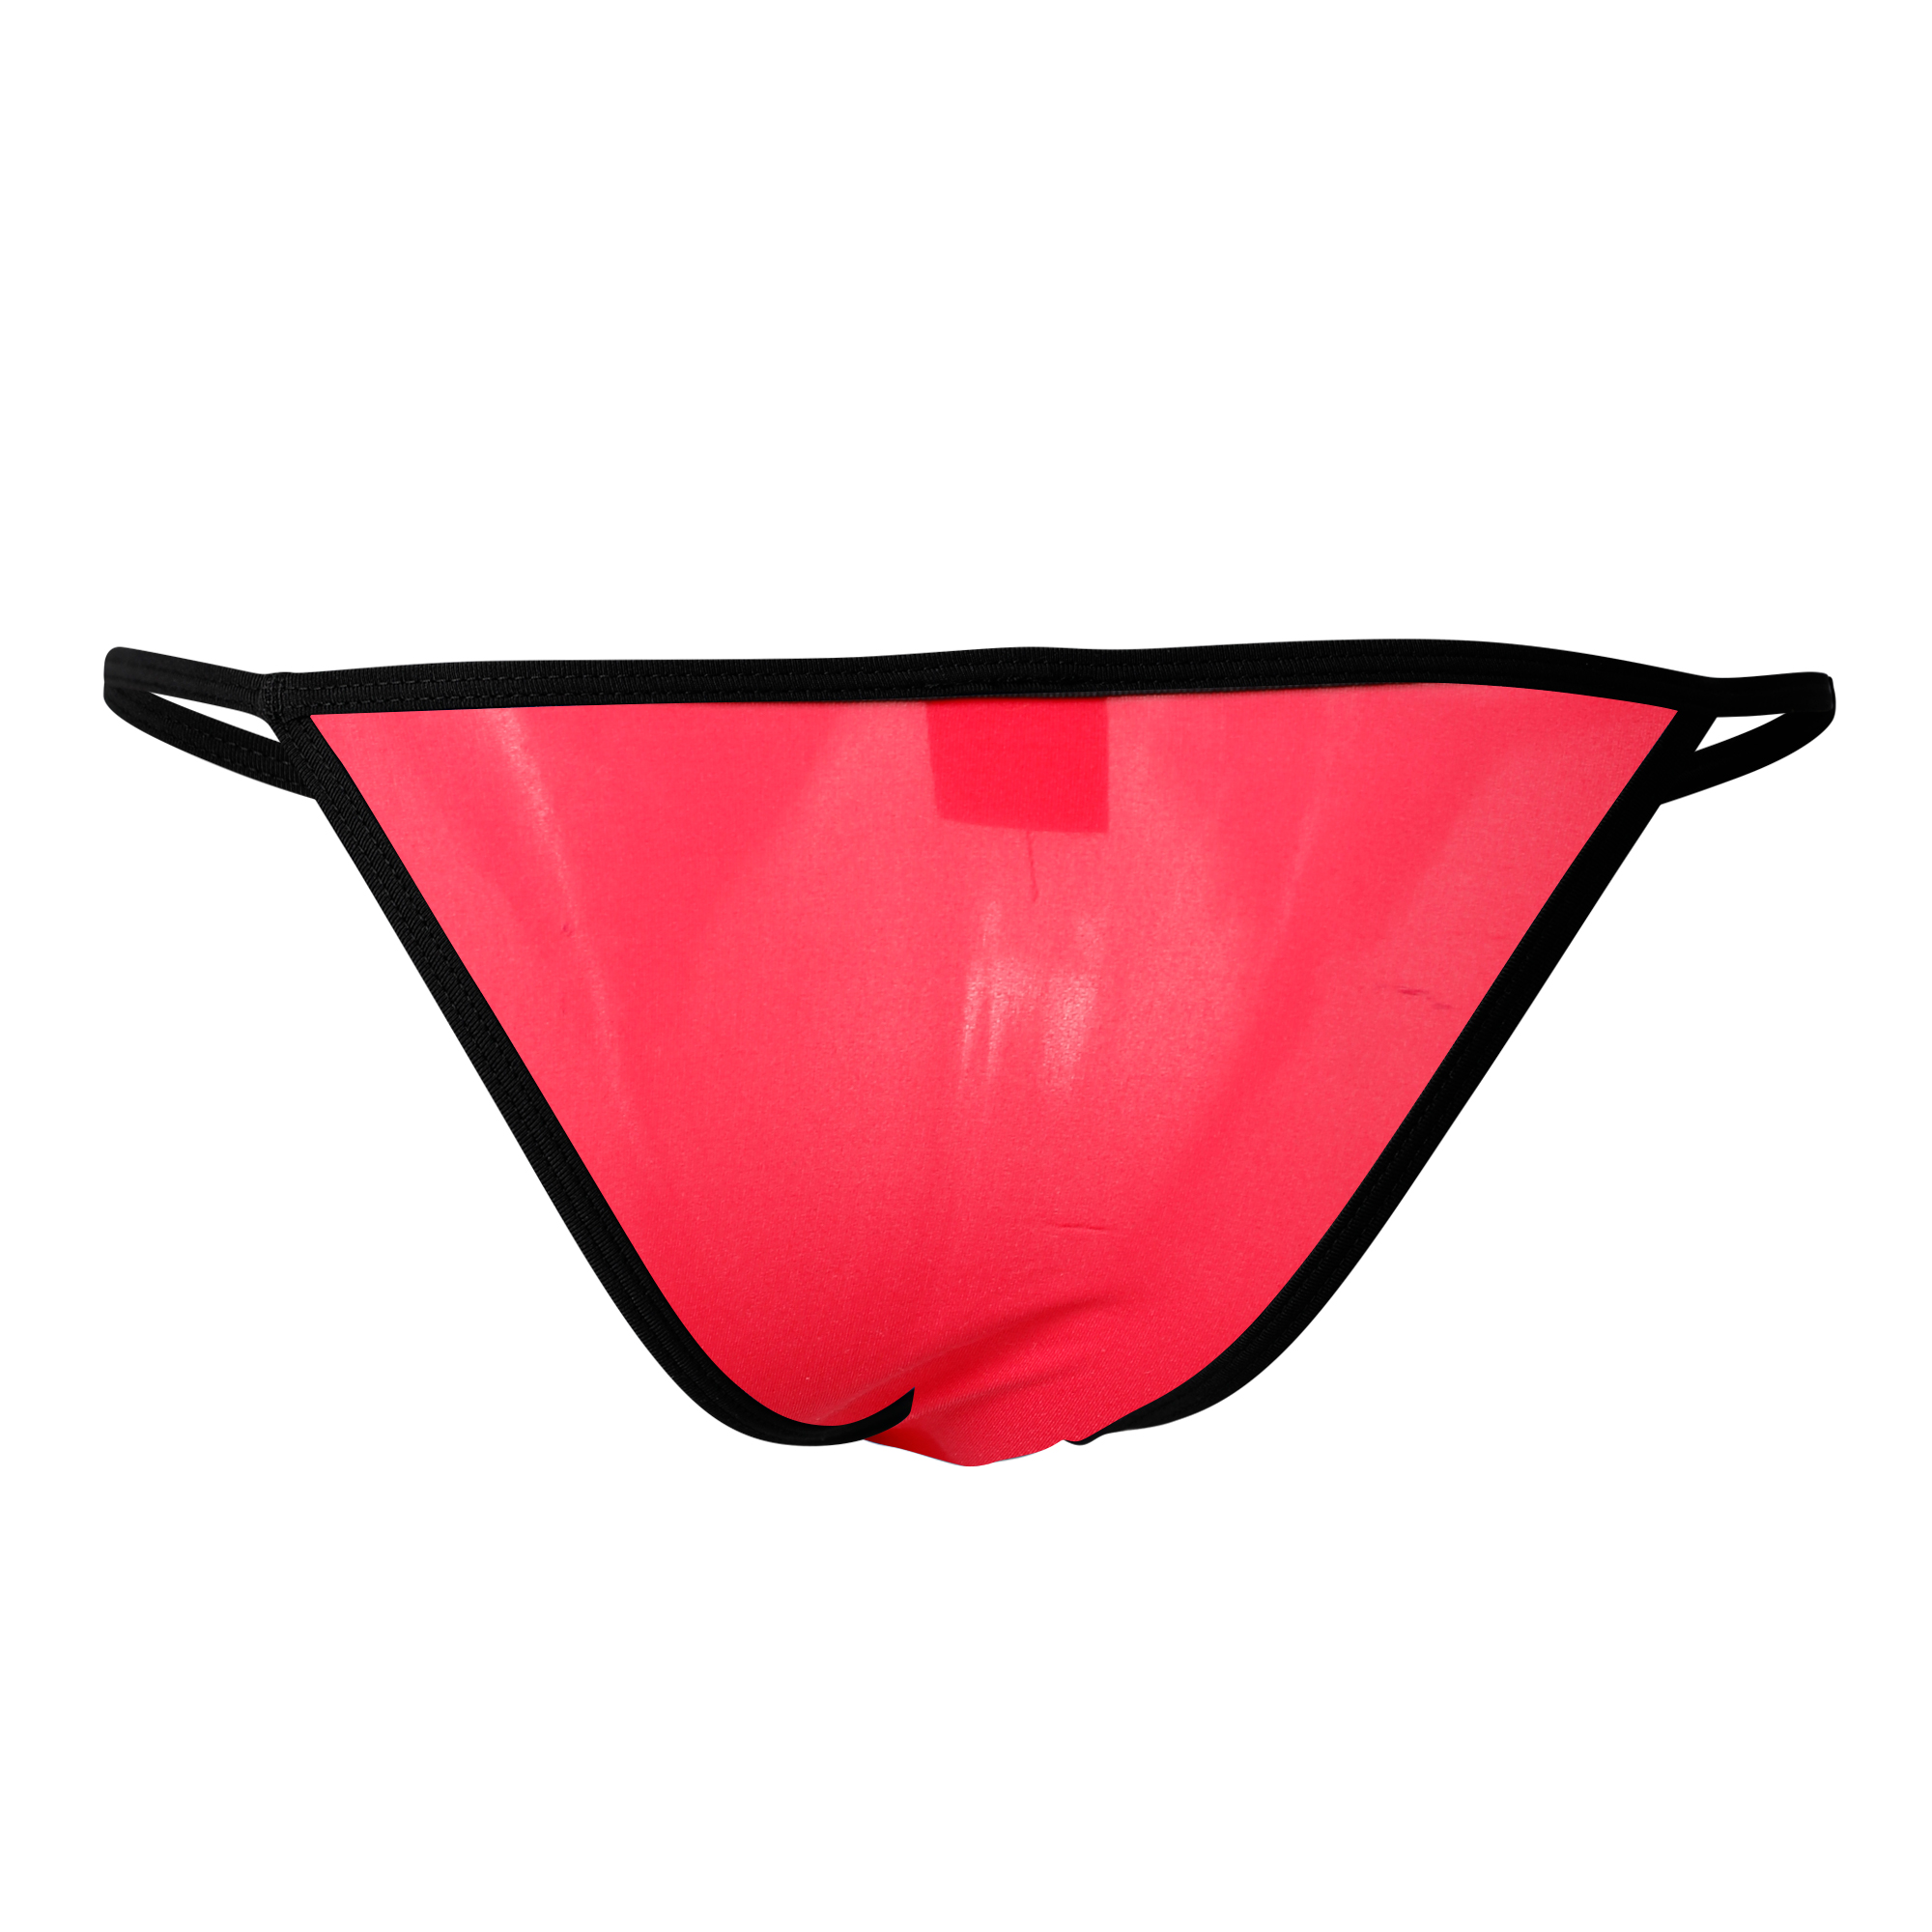 C4M Briefkini - Red OTS S (Special Edition)